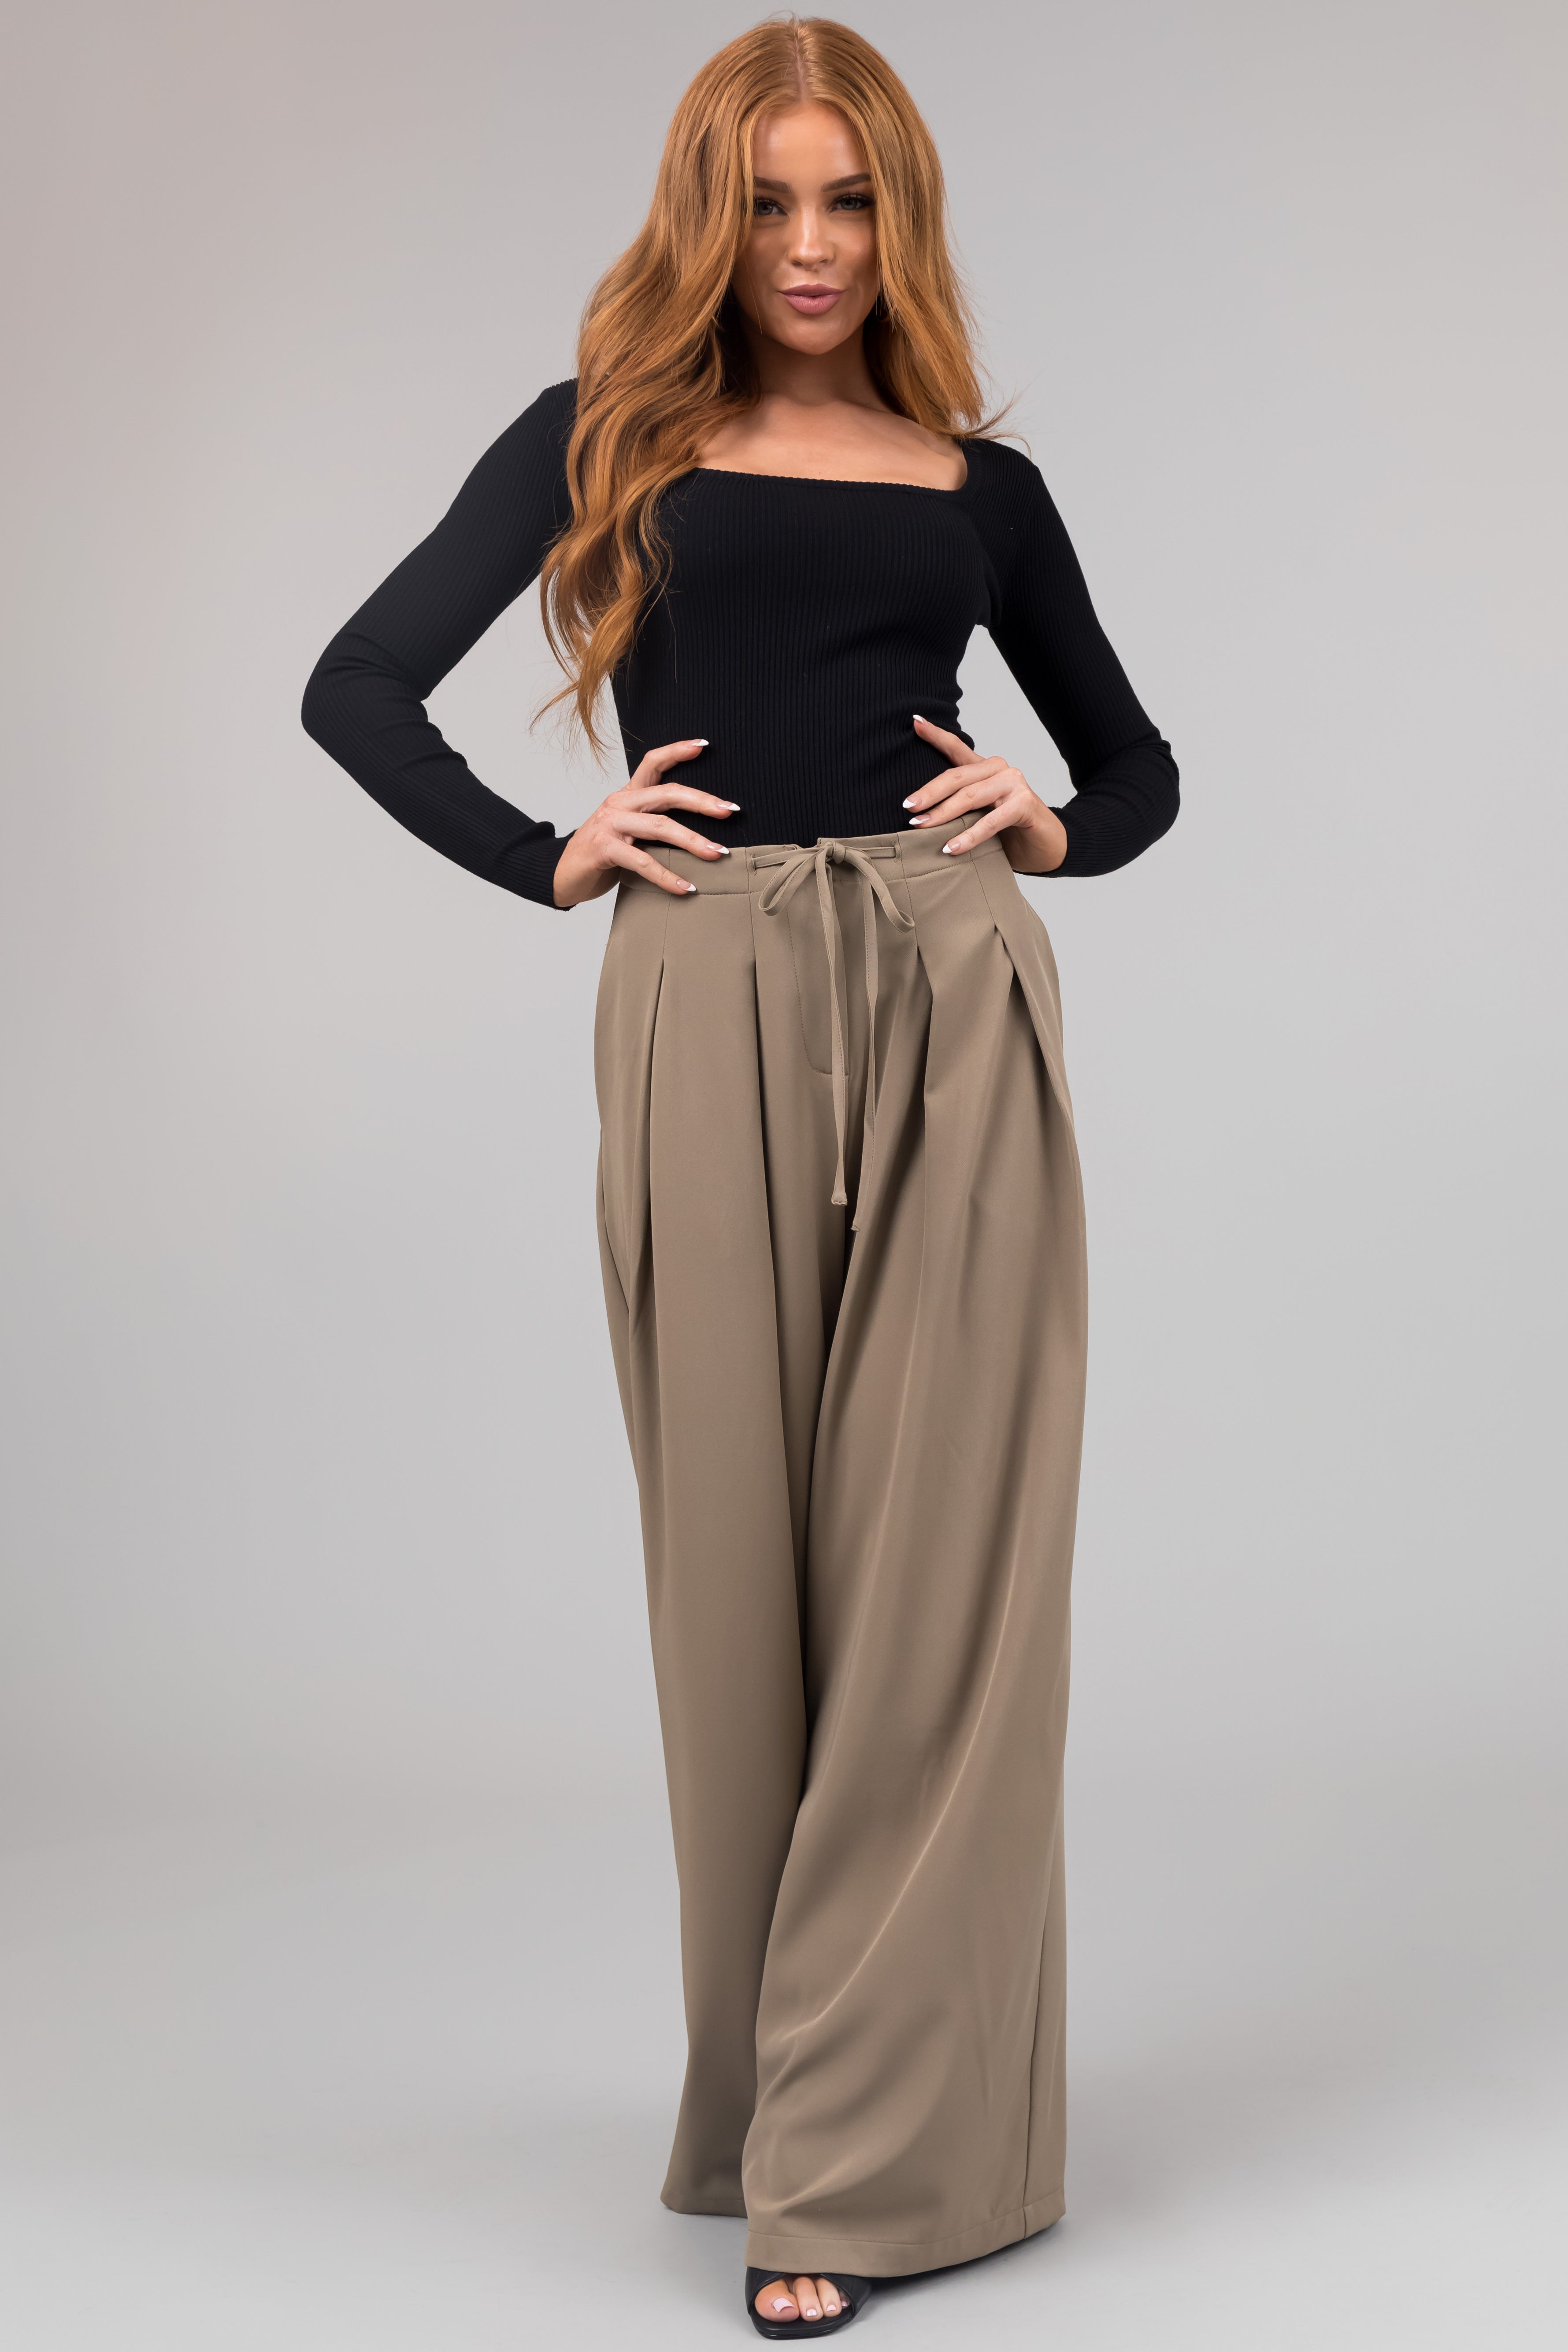 Lounge in Comfort High Waist Palazzo Pants in Olive - Dainty Hooligan